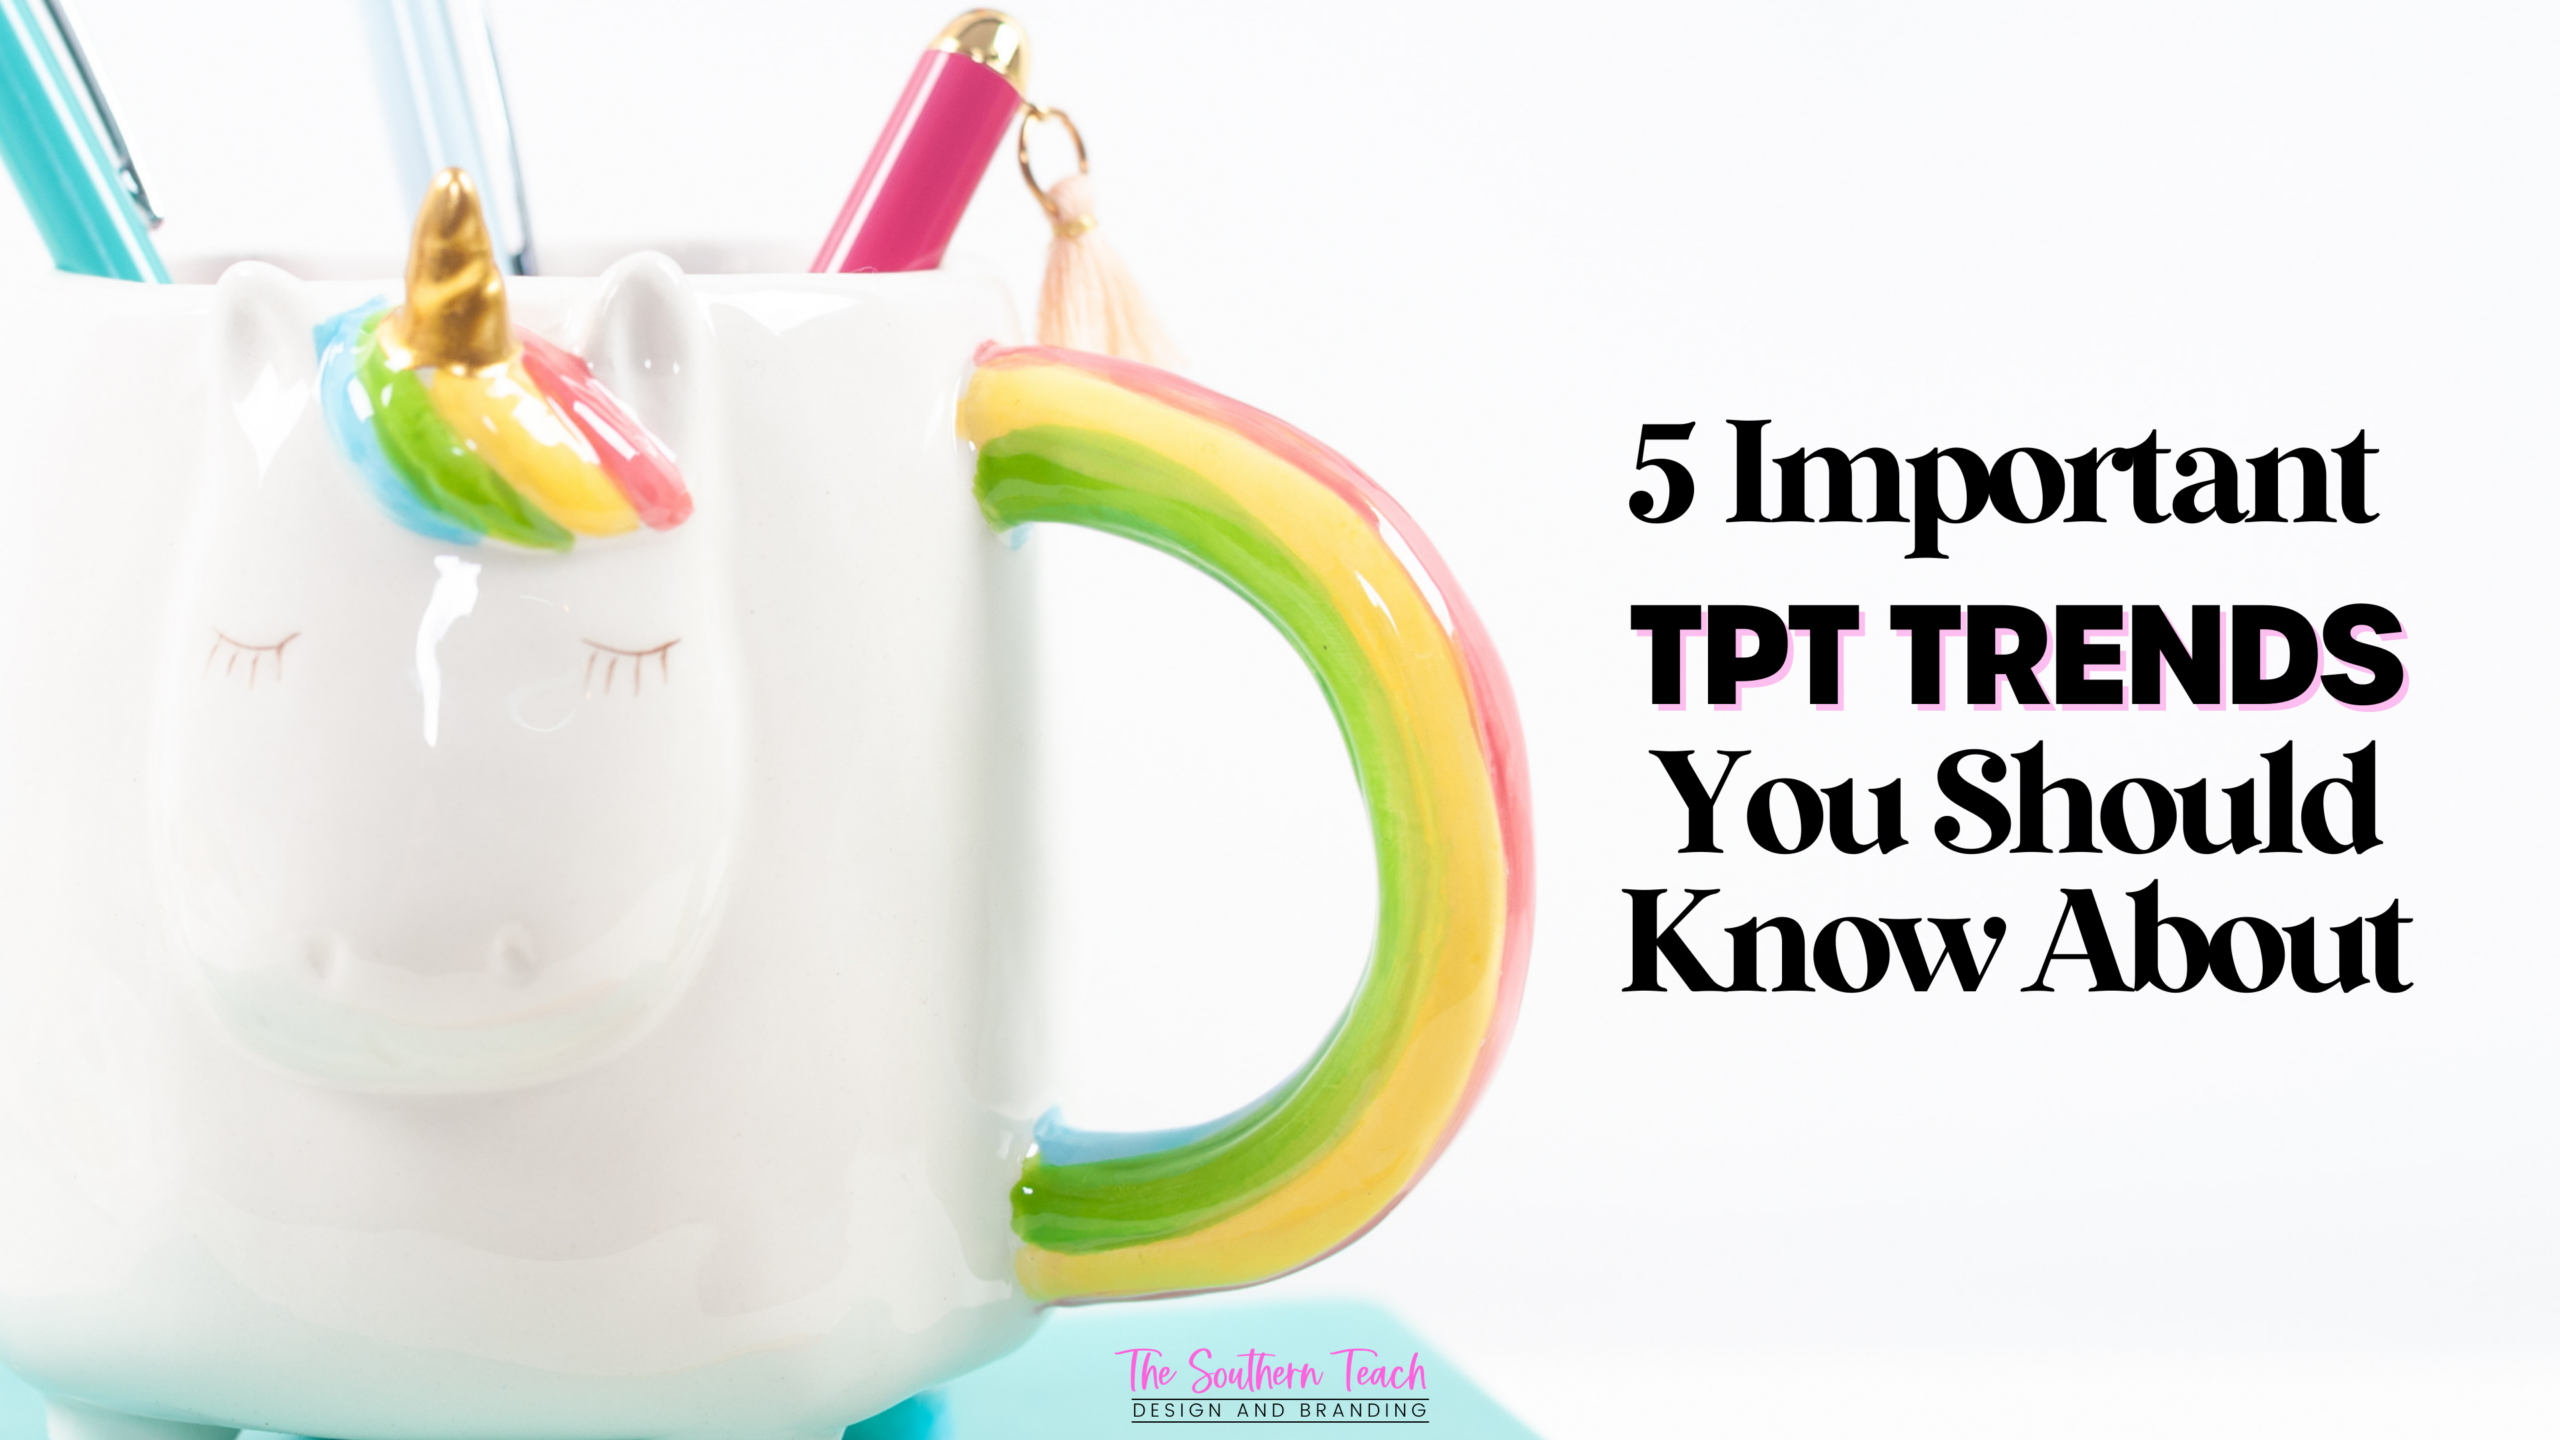 5 Important TPT Trends For Sellers